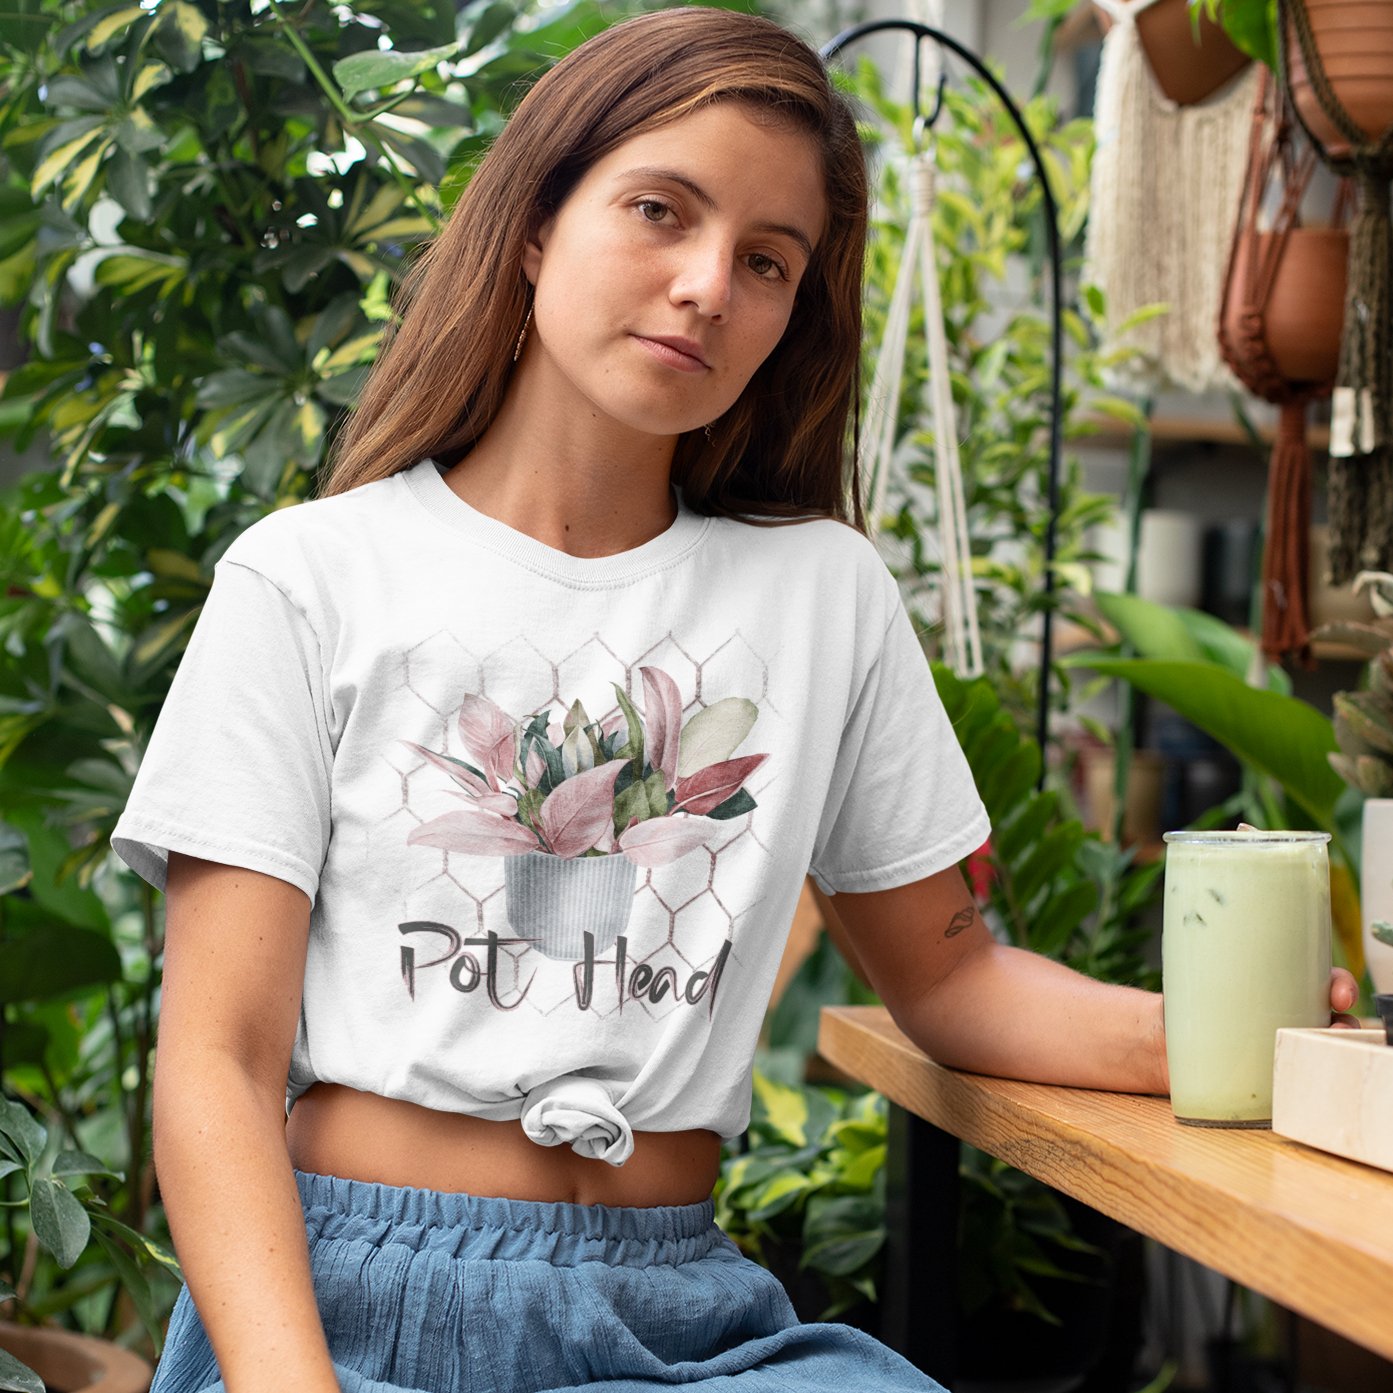 Woman wearing a pothead t-shirt with a plant on it